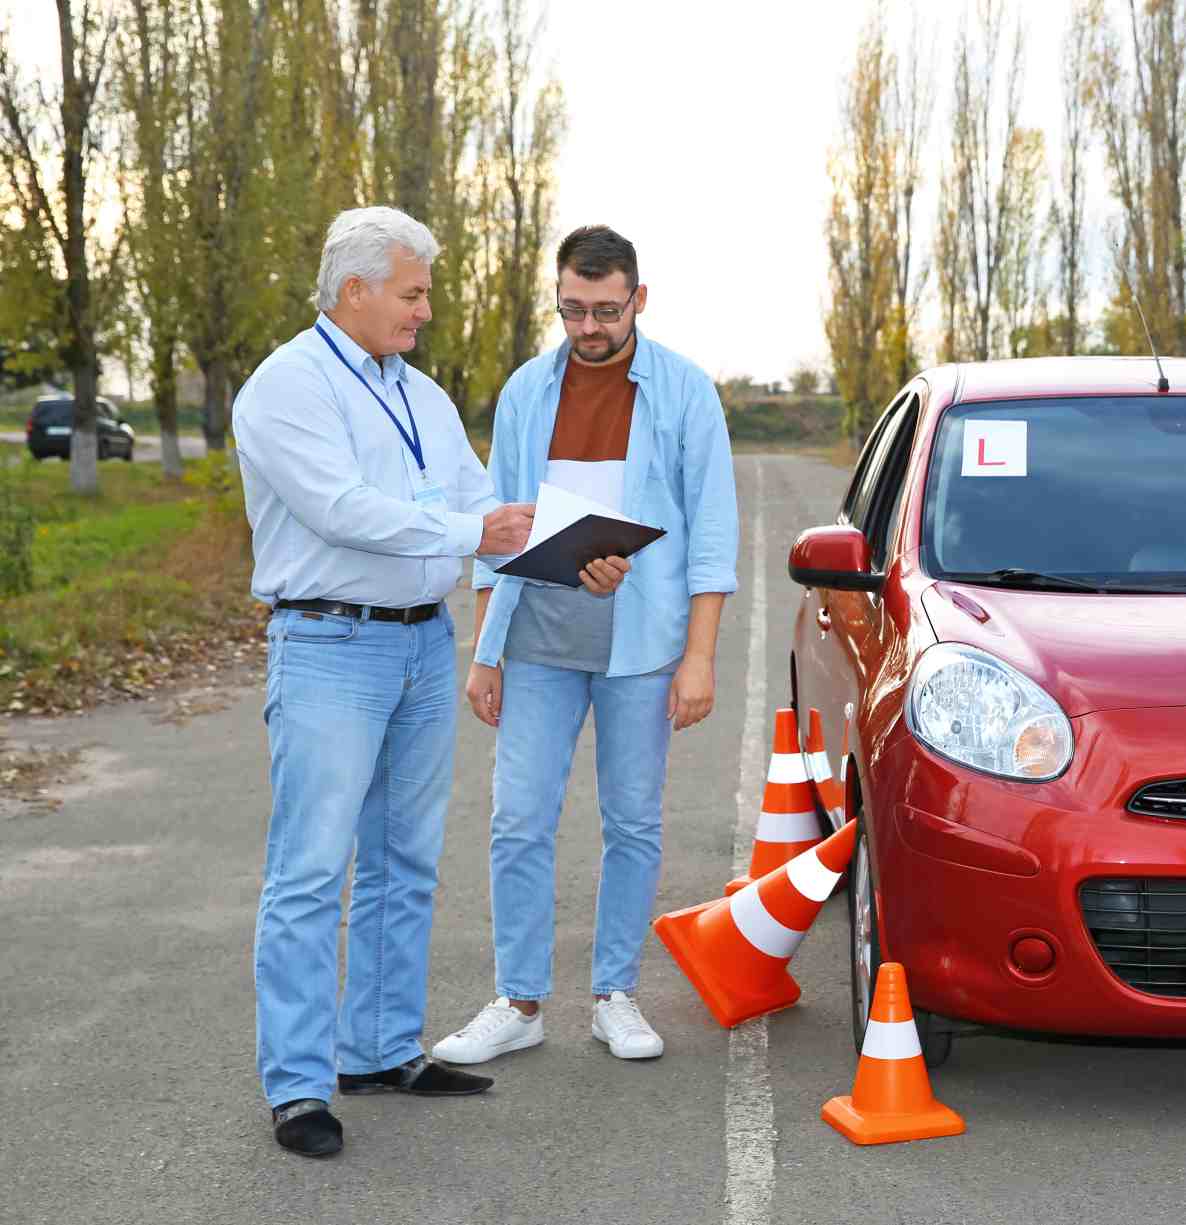 Driving Lessons in Oakville